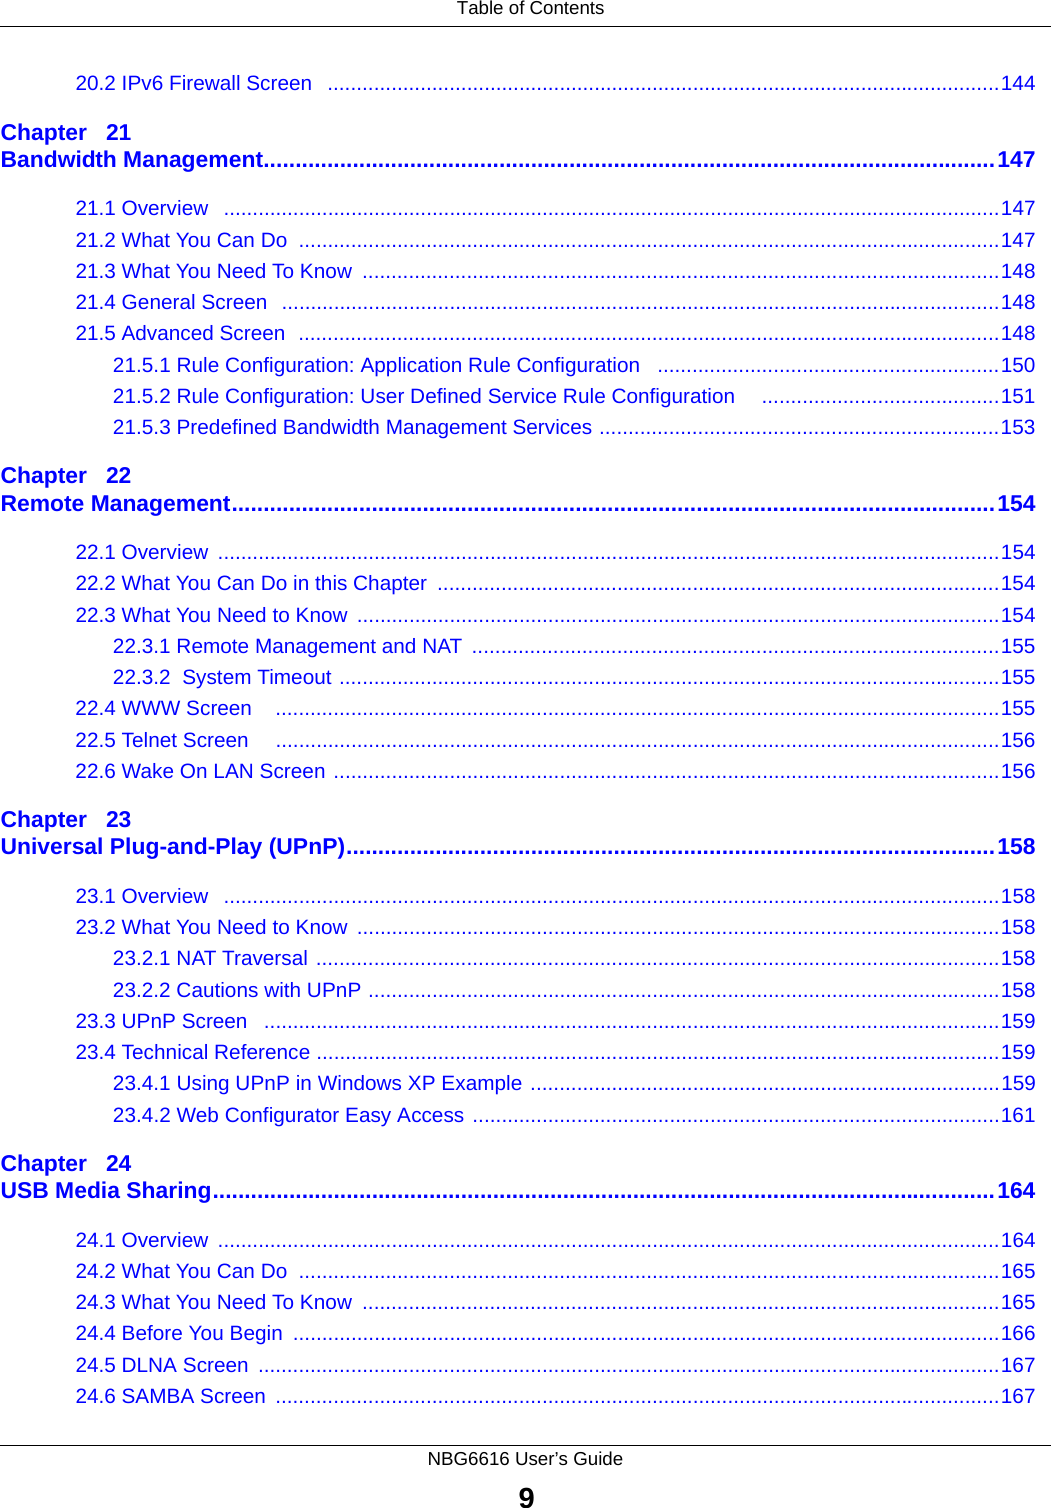  Table of ContentsNBG6616 User’s Guide920.2 IPv6 Firewall Screen   ....................................................................................................................144Chapter   21Bandwidth Management...................................................................................................................14721.1 Overview   ......................................................................................................................................14721.2 What You Can Do  .........................................................................................................................14721.3 What You Need To Know  ..............................................................................................................14821.4 General Screen  ............................................................................................................................14821.5 Advanced Screen  .........................................................................................................................14821.5.1 Rule Configuration: Application Rule Configuration   ...........................................................15021.5.2 Rule Configuration: User Defined Service Rule Configuration     .........................................15121.5.3 Predefined Bandwidth Management Services .....................................................................153Chapter   22Remote Management........................................................................................................................15422.1 Overview  .......................................................................................................................................15422.2 What You Can Do in this Chapter  .................................................................................................15422.3 What You Need to Know  ...............................................................................................................15422.3.1 Remote Management and NAT  ...........................................................................................15522.3.2  System Timeout ..................................................................................................................15522.4 WWW Screen    .............................................................................................................................15522.5 Telnet Screen     .............................................................................................................................15622.6 Wake On LAN Screen ...................................................................................................................156Chapter   23Universal Plug-and-Play (UPnP)......................................................................................................15823.1 Overview   ......................................................................................................................................15823.2 What You Need to Know  ...............................................................................................................15823.2.1 NAT Traversal ......................................................................................................................15823.2.2 Cautions with UPnP .............................................................................................................15823.3 UPnP Screen   ...............................................................................................................................15923.4 Technical Reference ......................................................................................................................15923.4.1 Using UPnP in Windows XP Example .................................................................................15923.4.2 Web Configurator Easy Access ...........................................................................................161Chapter   24USB Media Sharing...........................................................................................................................16424.1 Overview  .......................................................................................................................................16424.2 What You Can Do  .........................................................................................................................16524.3 What You Need To Know  ..............................................................................................................16524.4 Before You Begin  ..........................................................................................................................16624.5 DLNA Screen  ................................................................................................................................16724.6 SAMBA Screen  .............................................................................................................................167